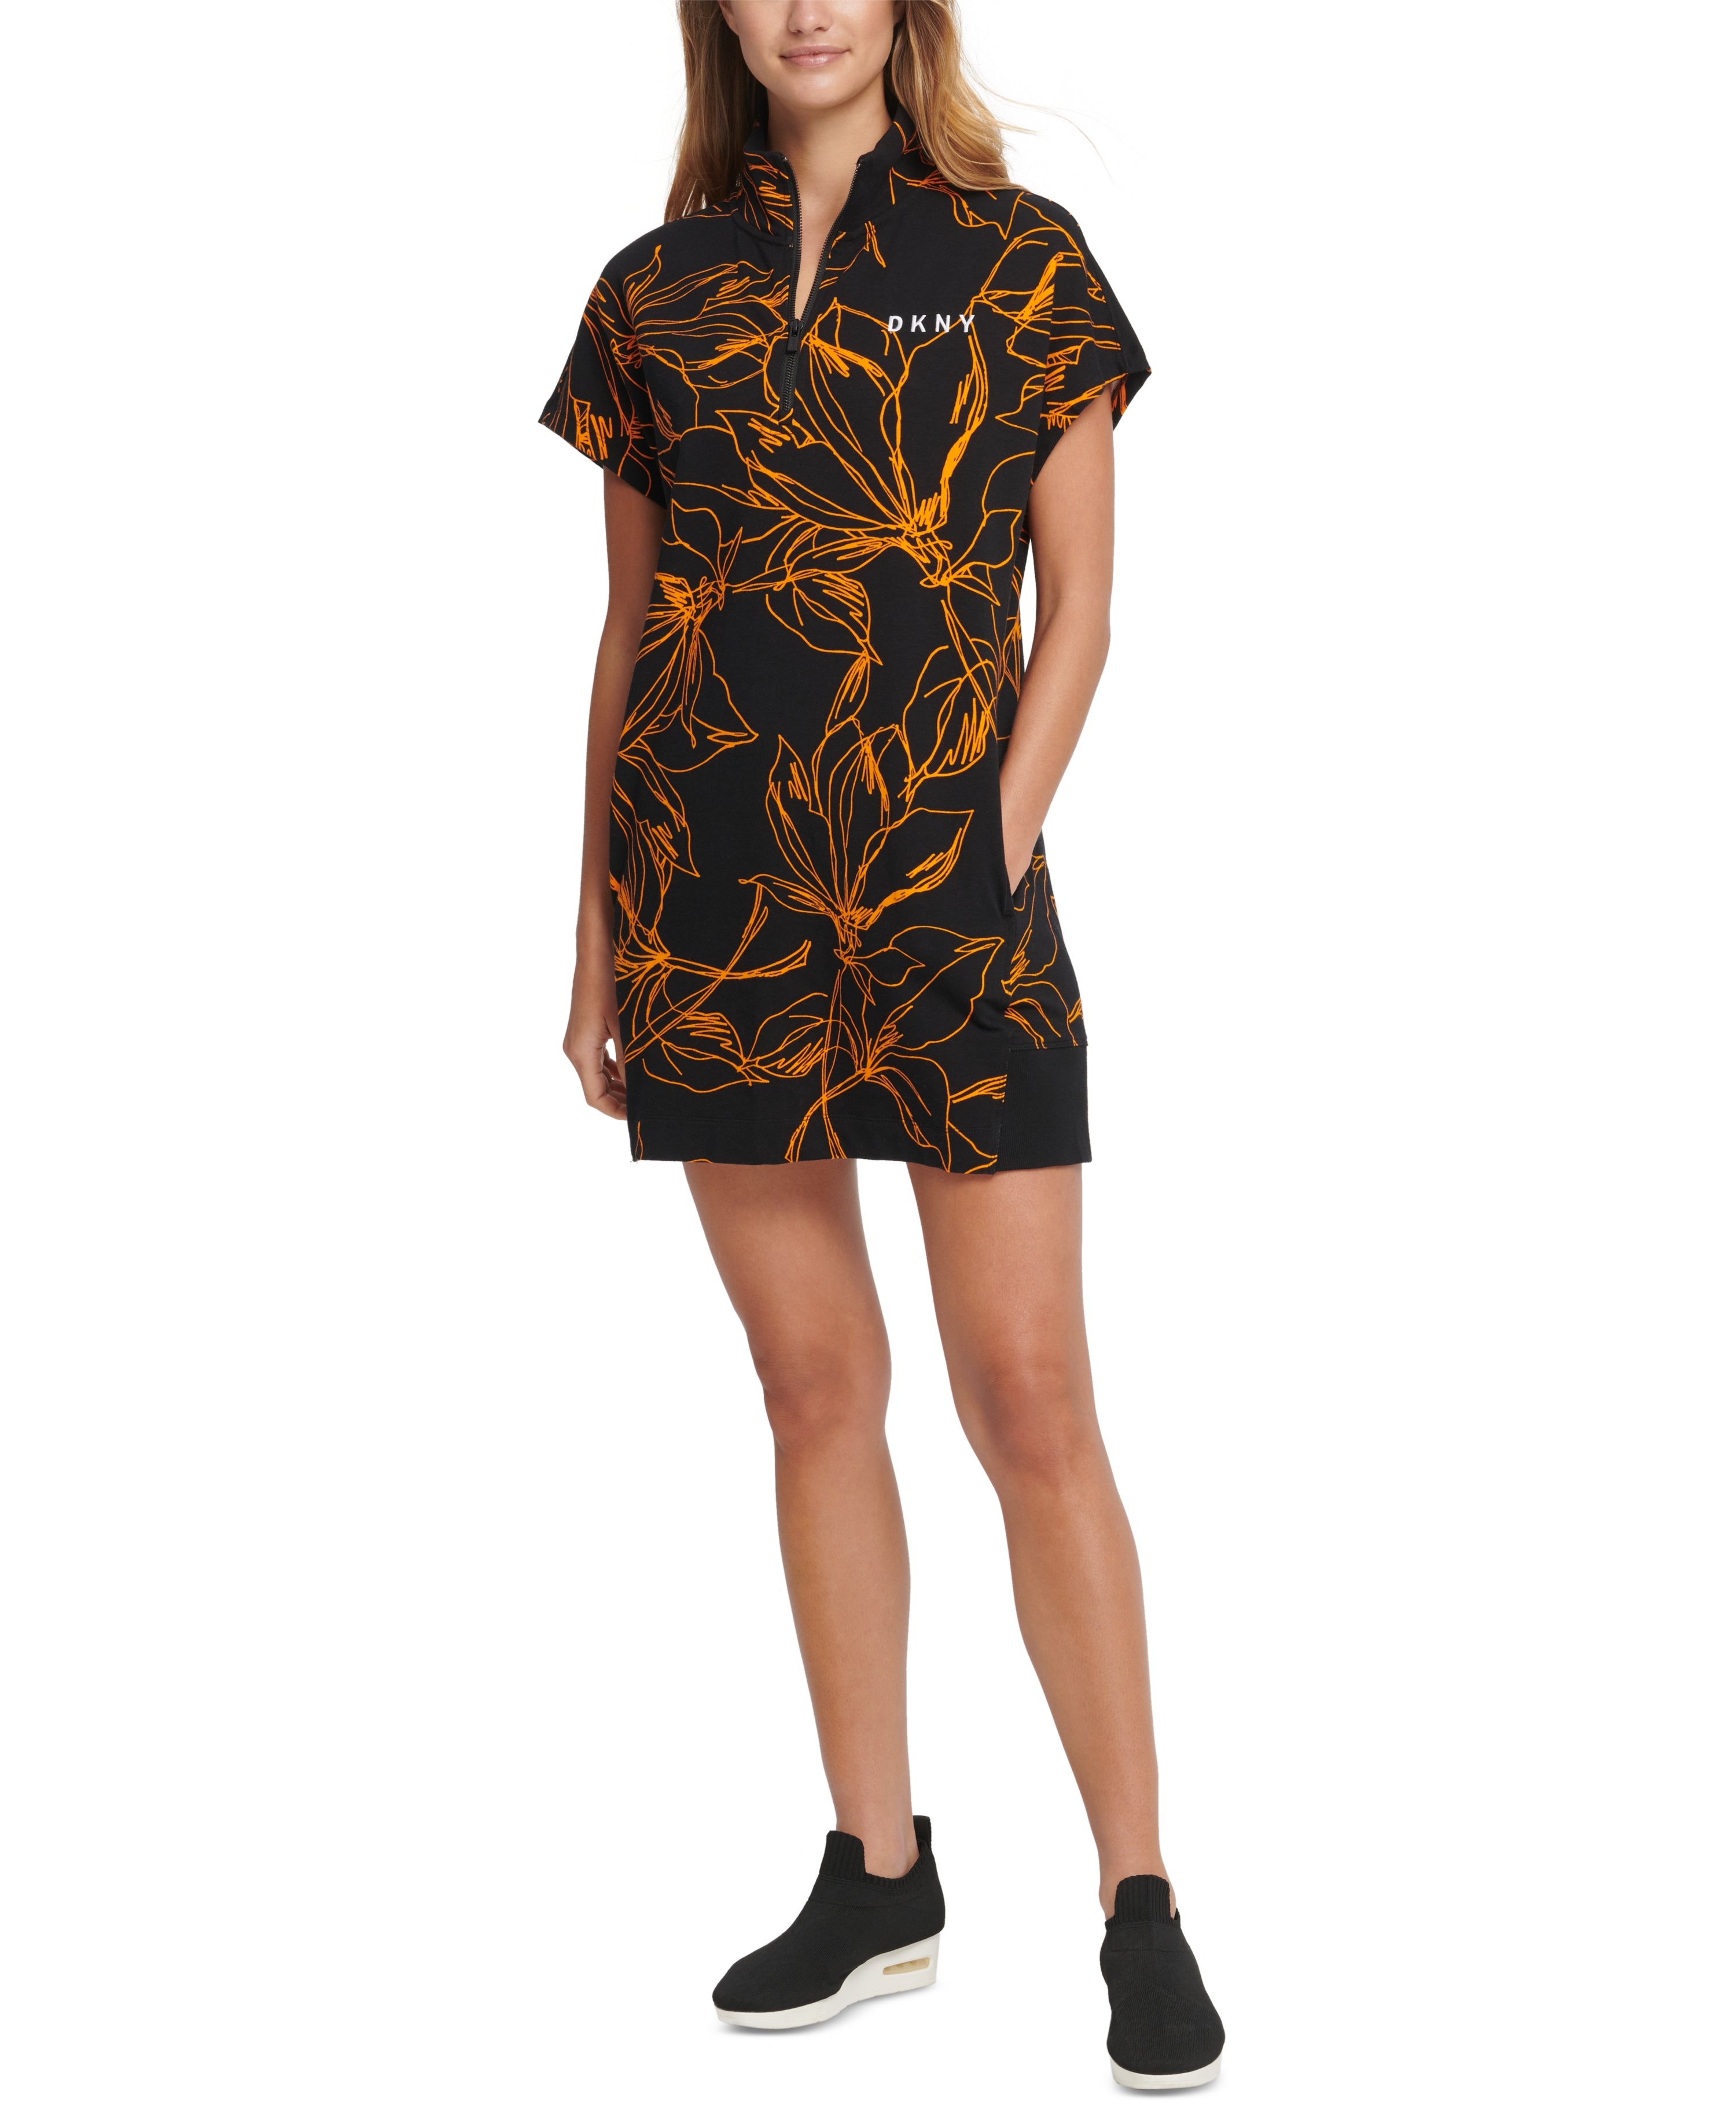 DKNY Womens Stand Collar Printed Sneaker Fitness Dress